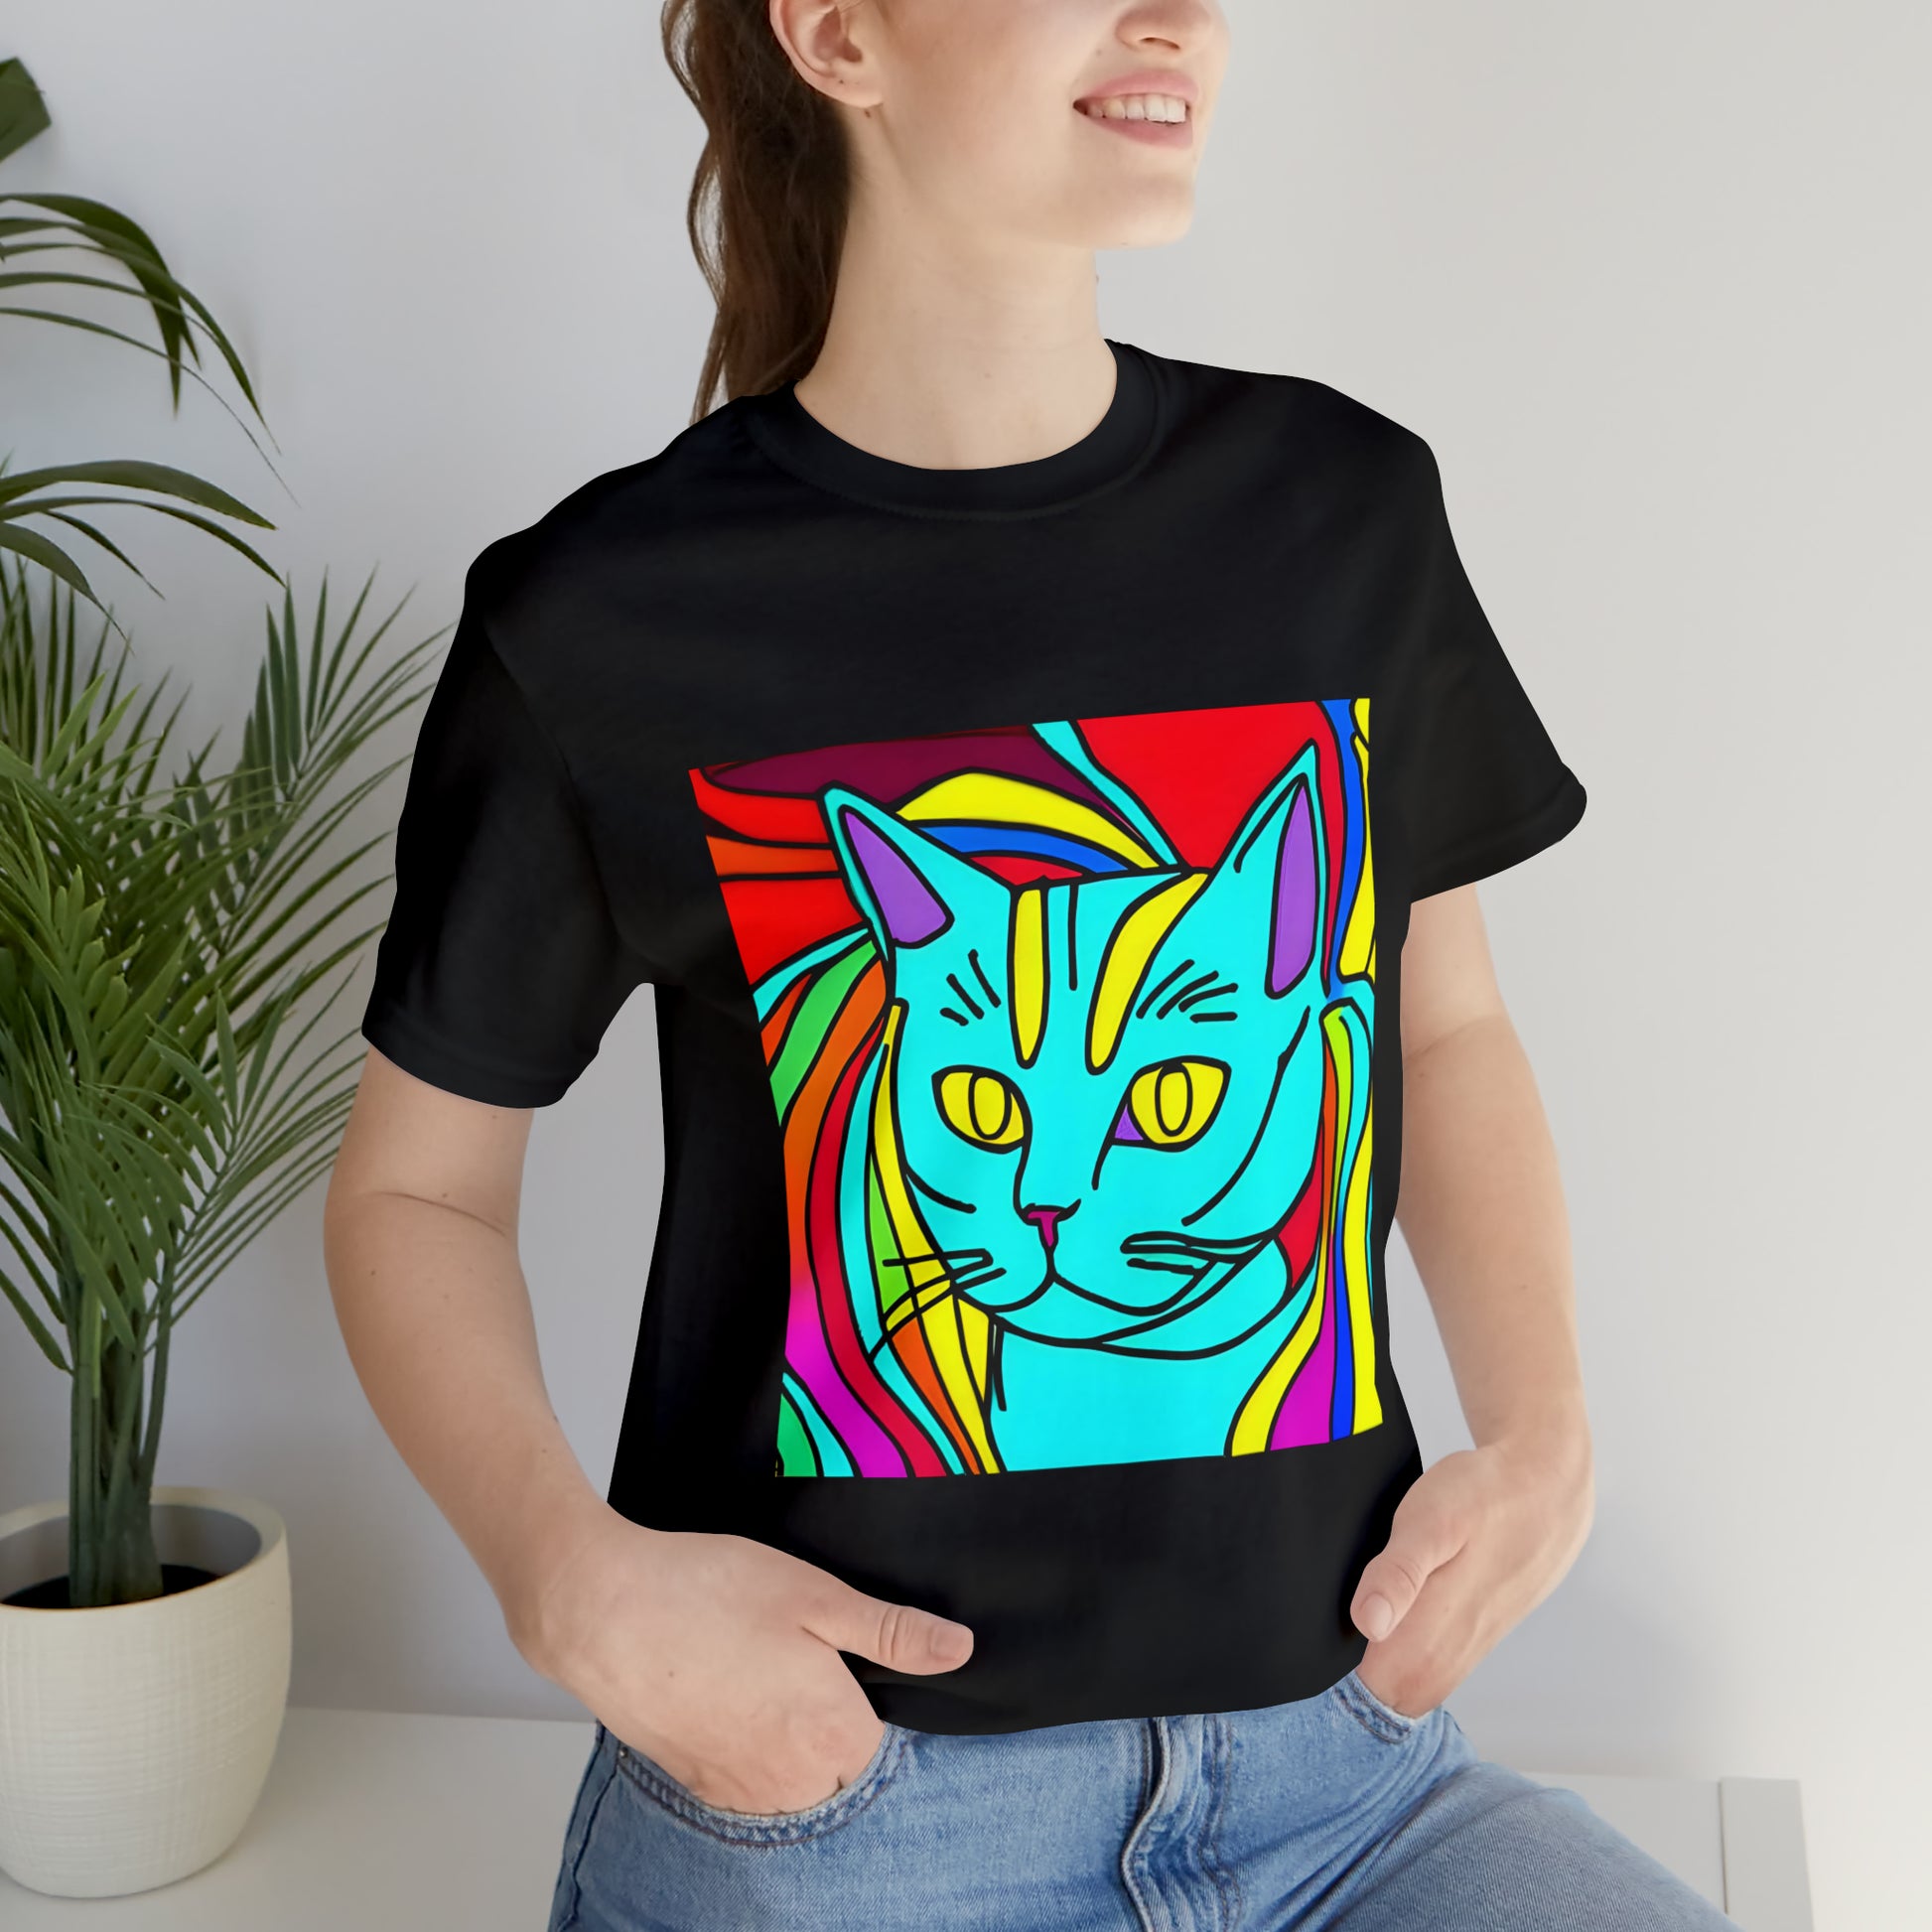 Colorful art cat t-shirt, Psychedelic Cat Shirt, Trippy Cat Shirt, Cool Graphic Tshirts, Mystical cat tee, Cute Cat Shirt, cat lover gift